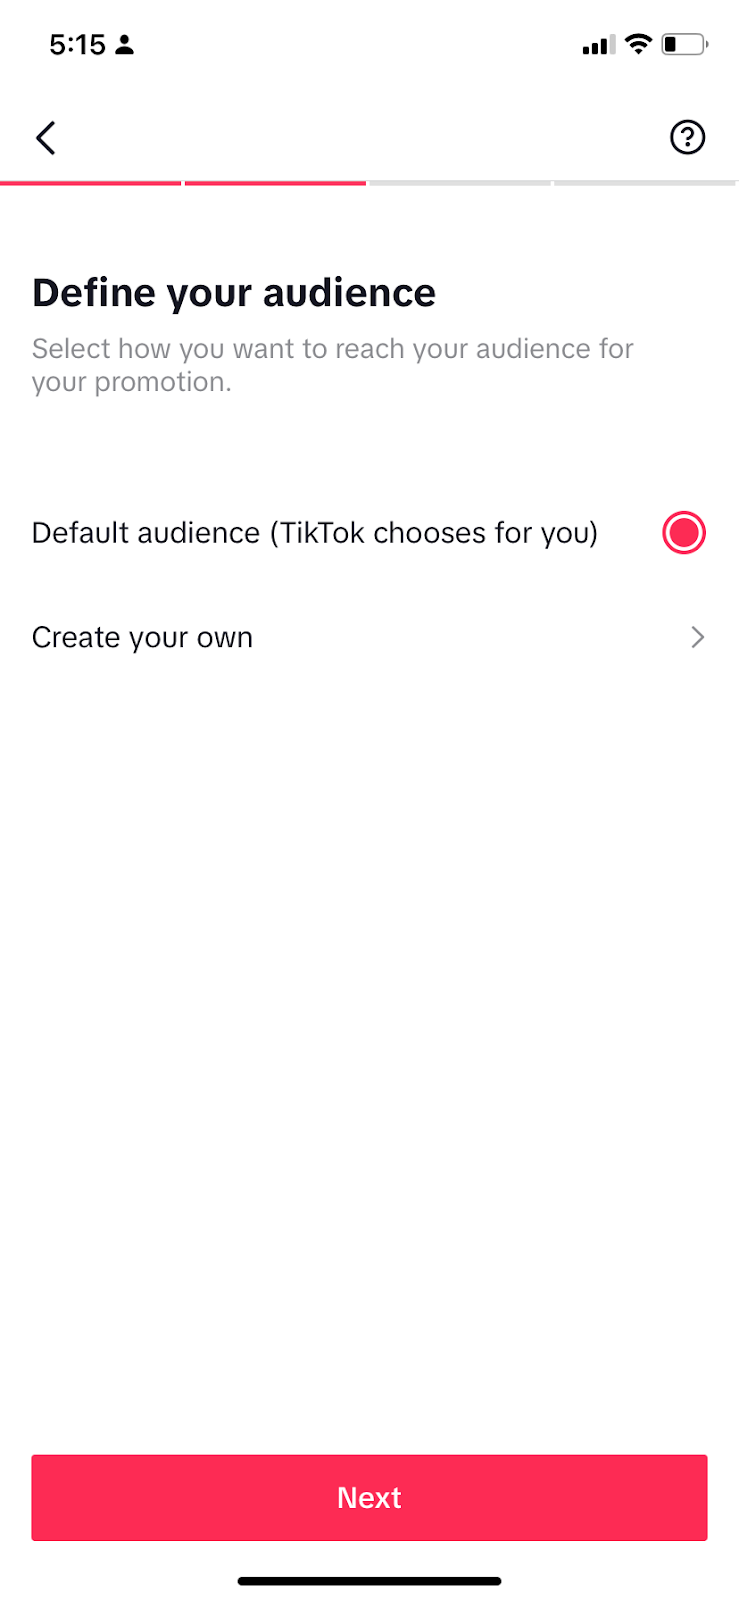 The Define Your Audience screen in TikTok Promote